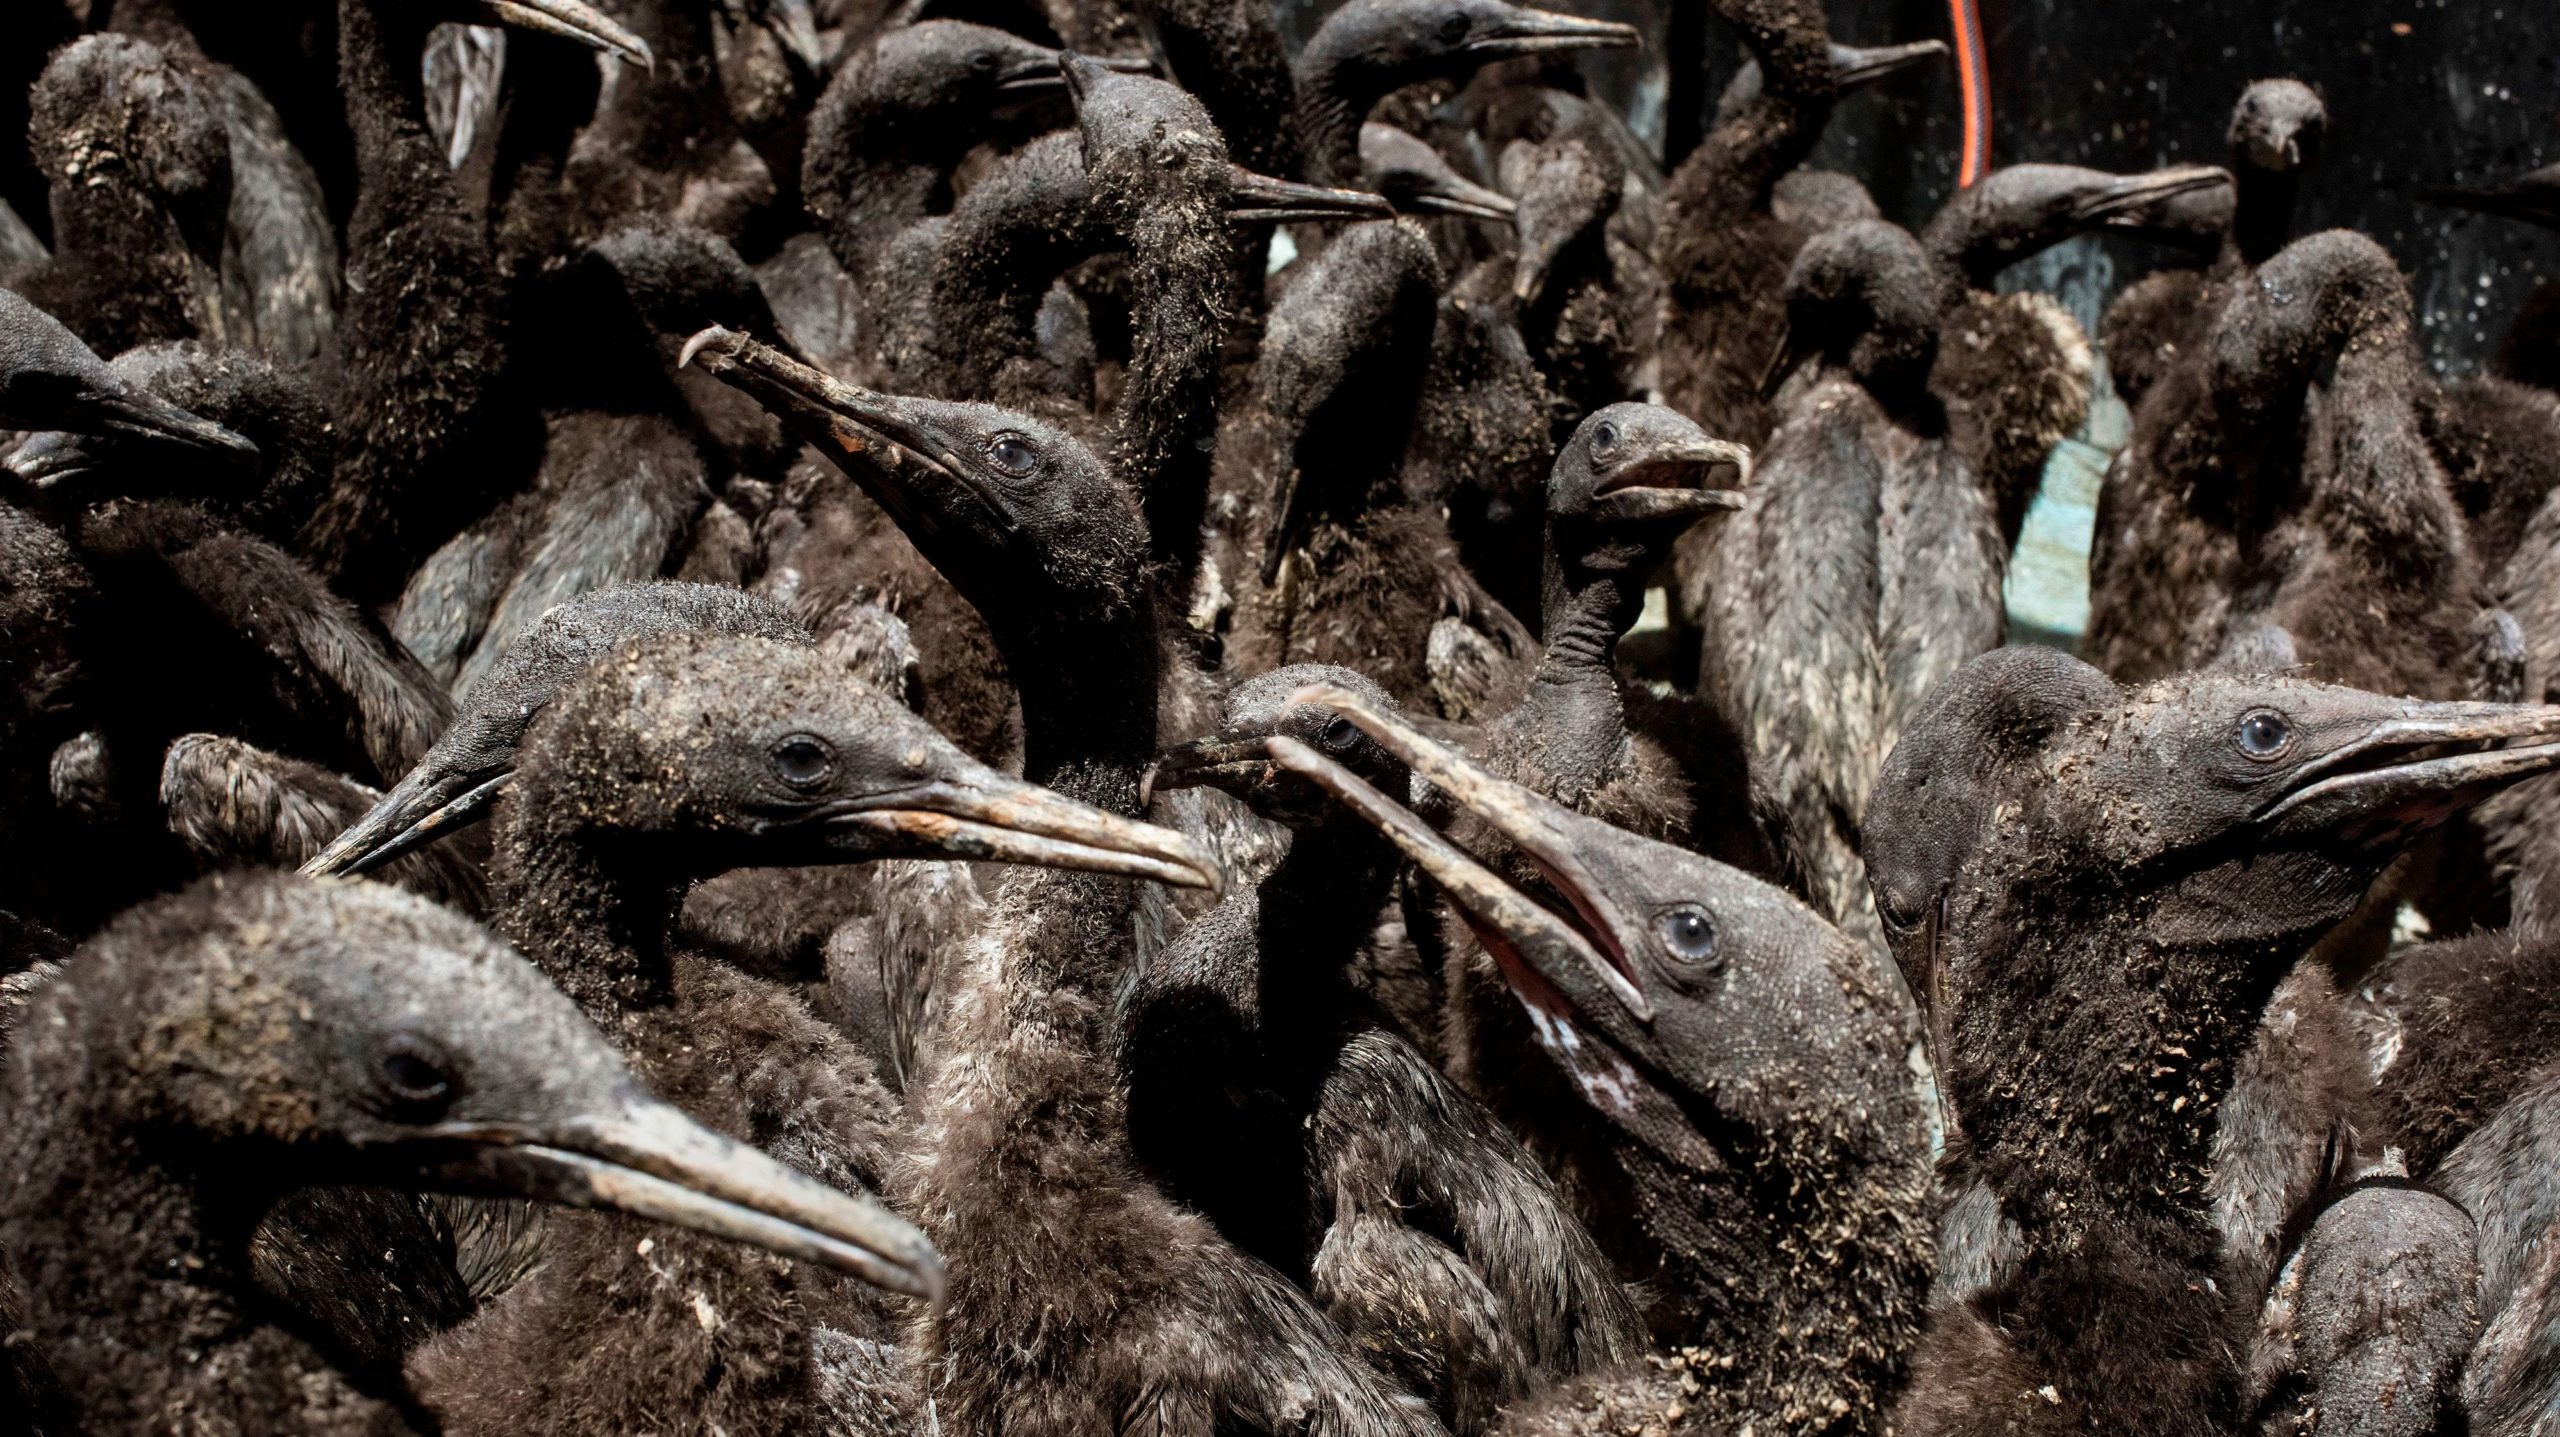 The foundation is taking care of nearly 1,200 Cape cormorant chicks. (Photo: Rodger Bosch / AFP, Getty Images)